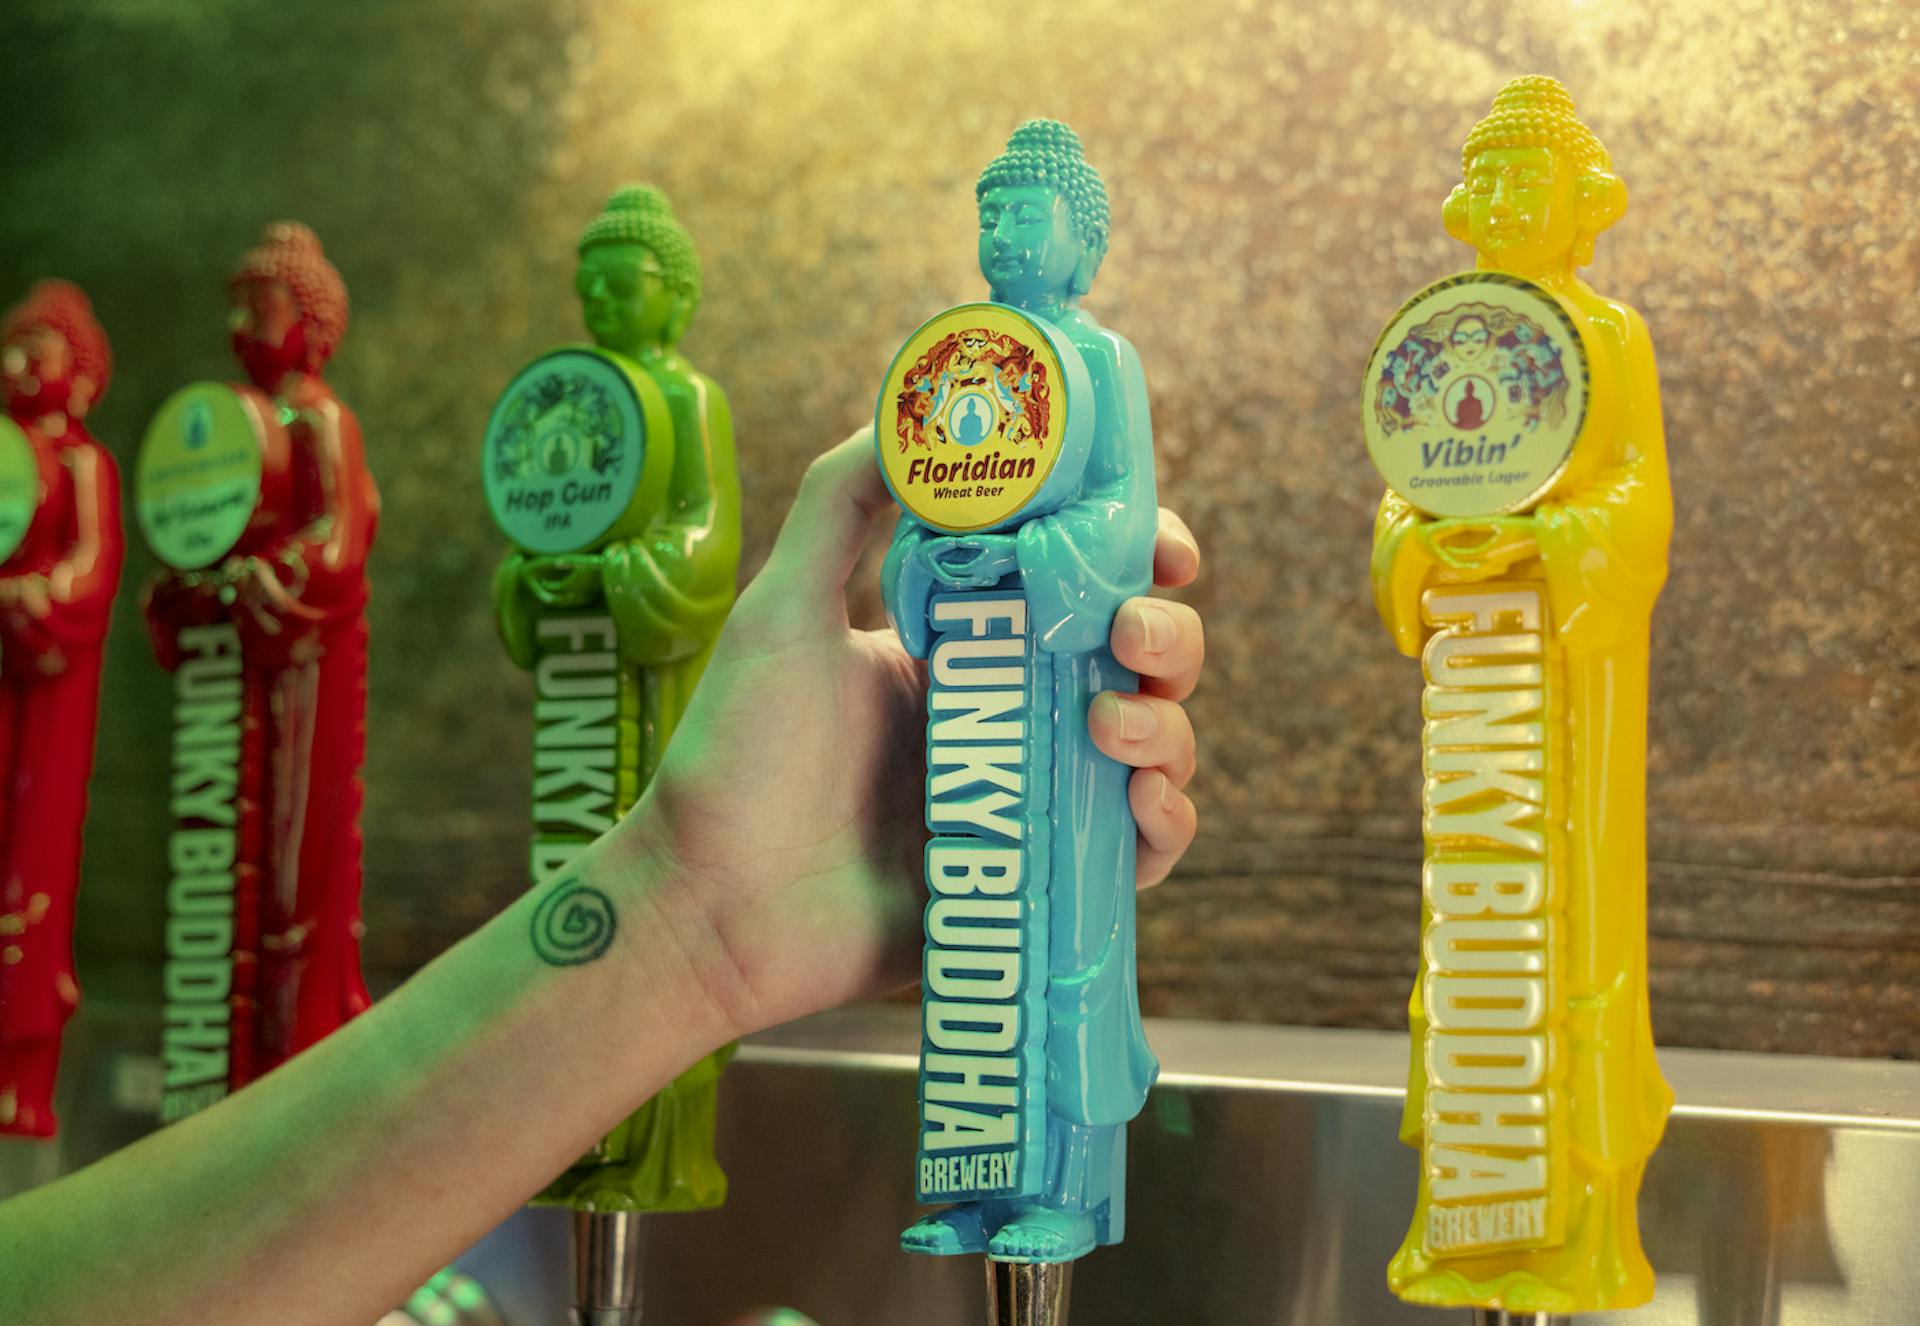 Funky Buddha Floridian Wheat Beer tap handle